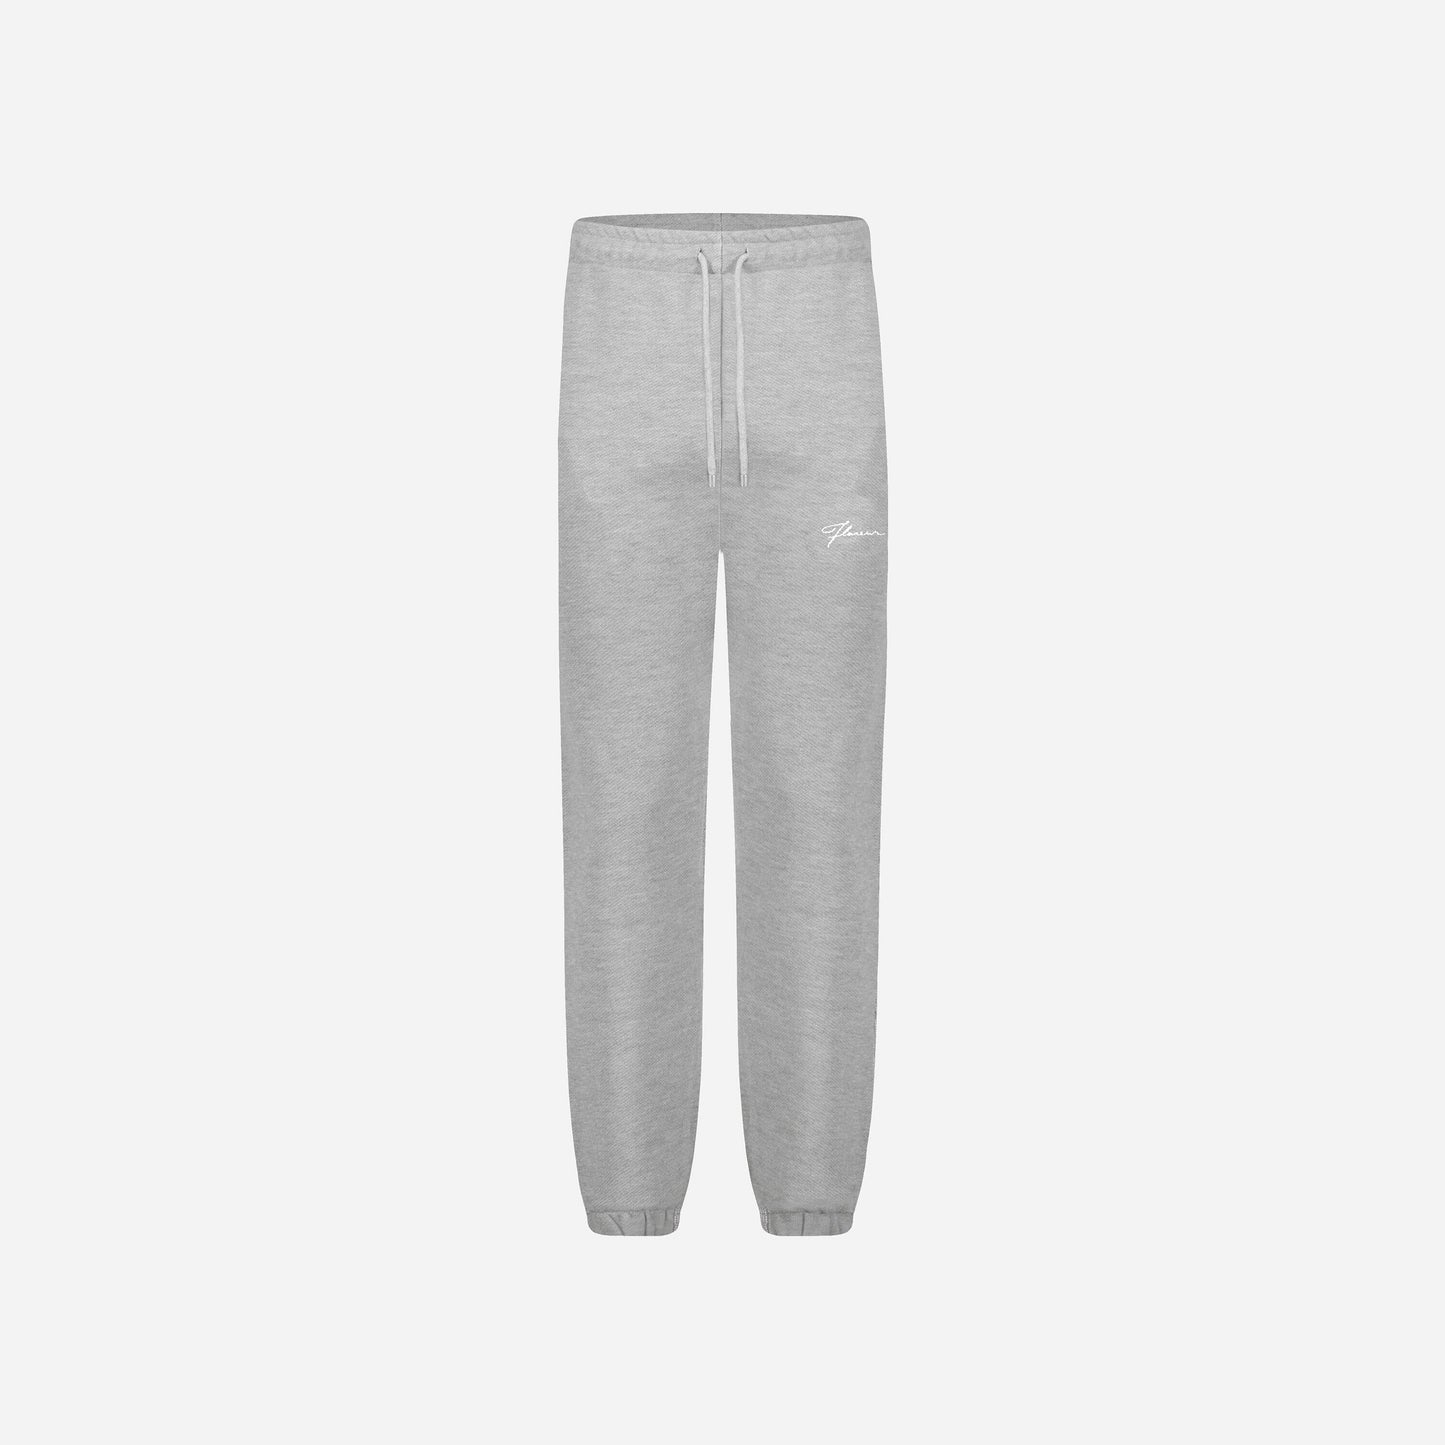 Embroidered Signature Sweatpants in Heather Grey